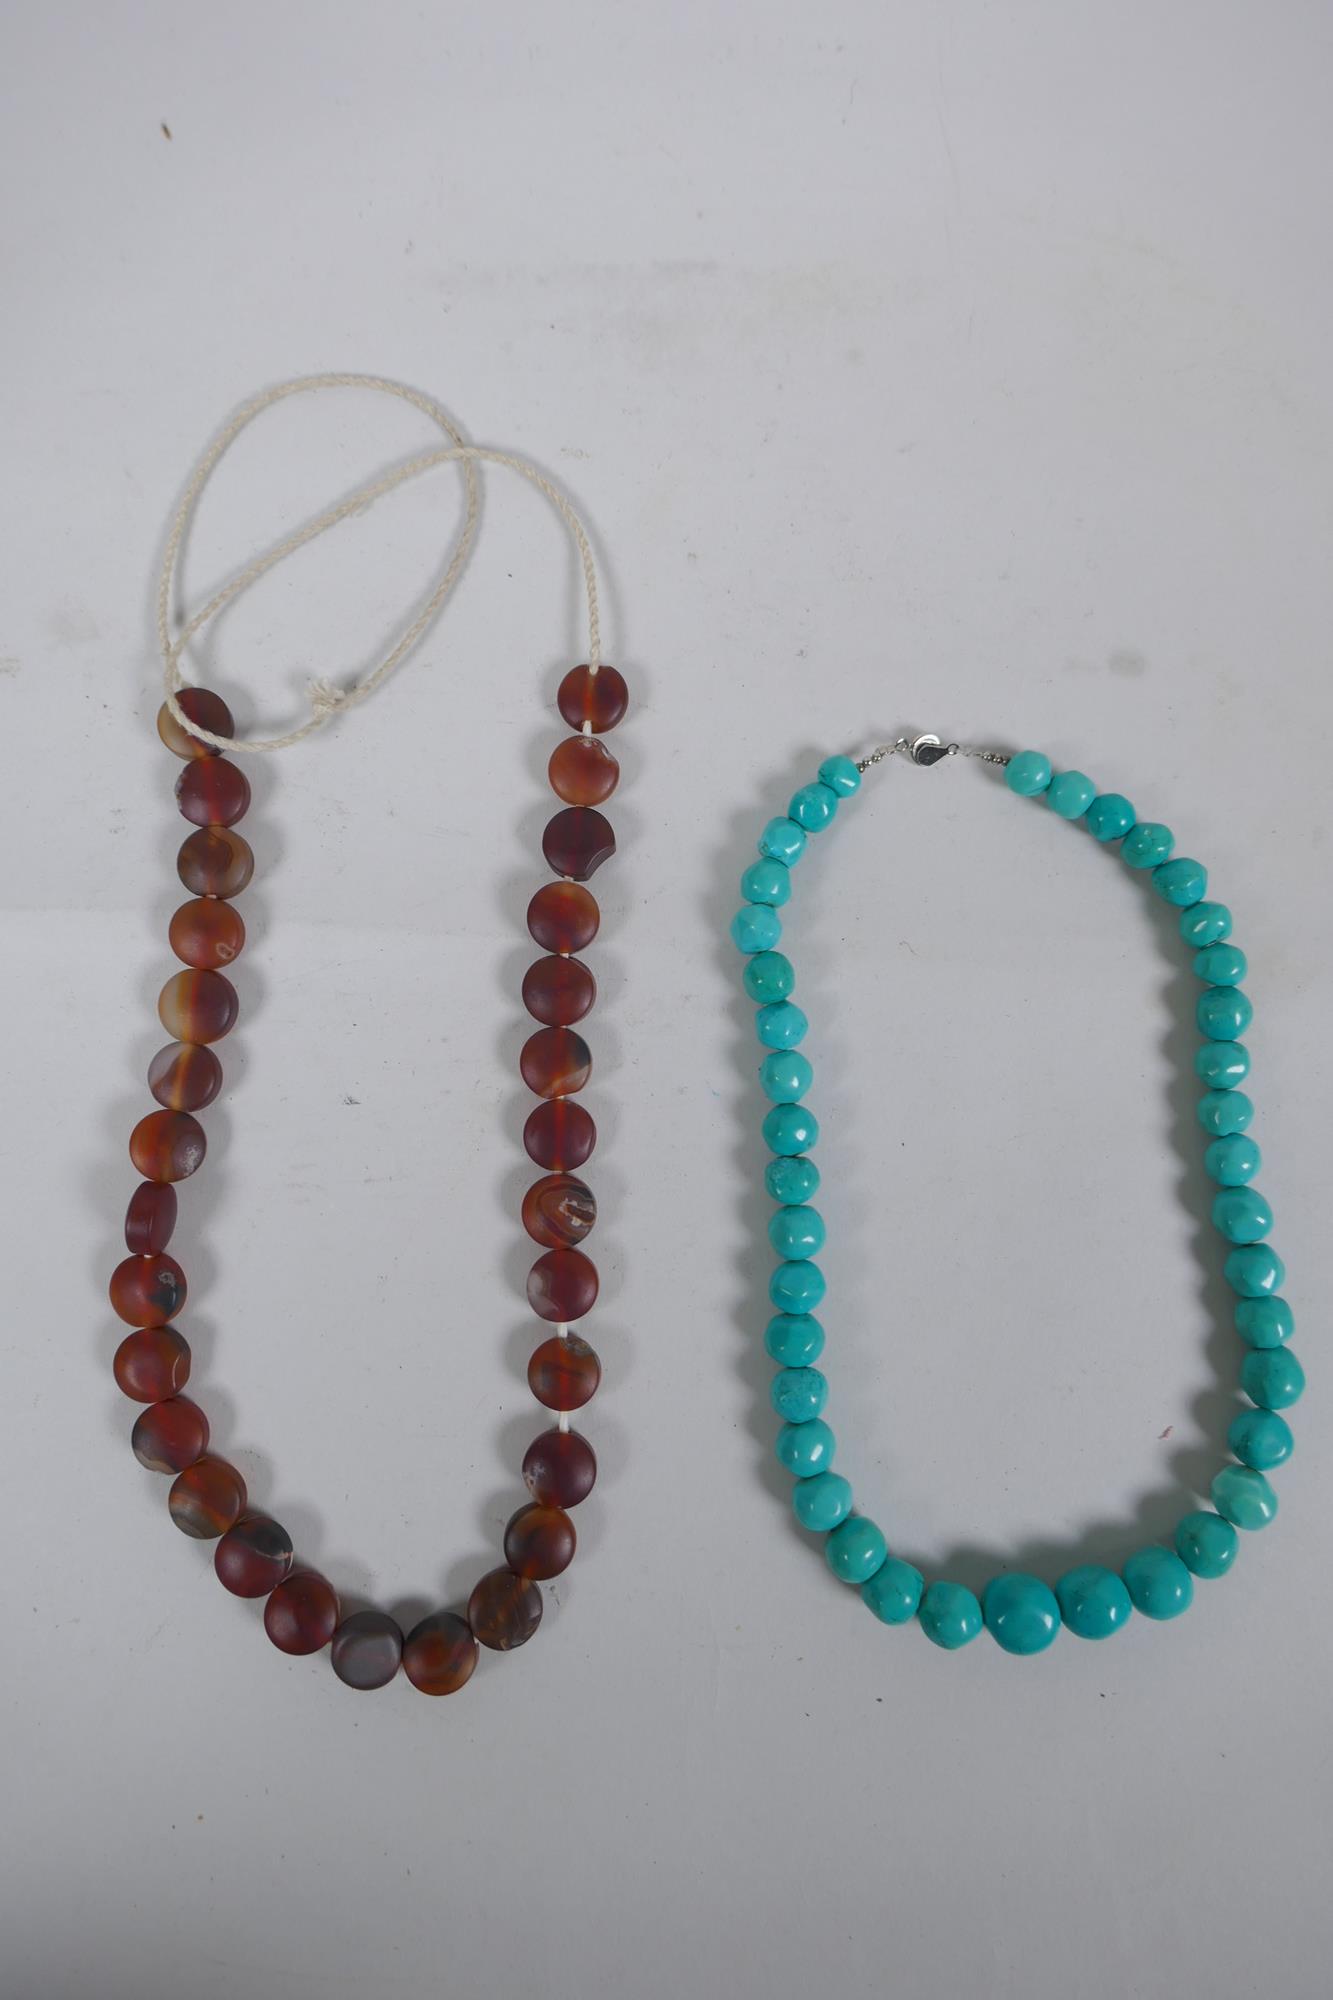 A string of graduated turquoise beads, together with a string of amber agate beads